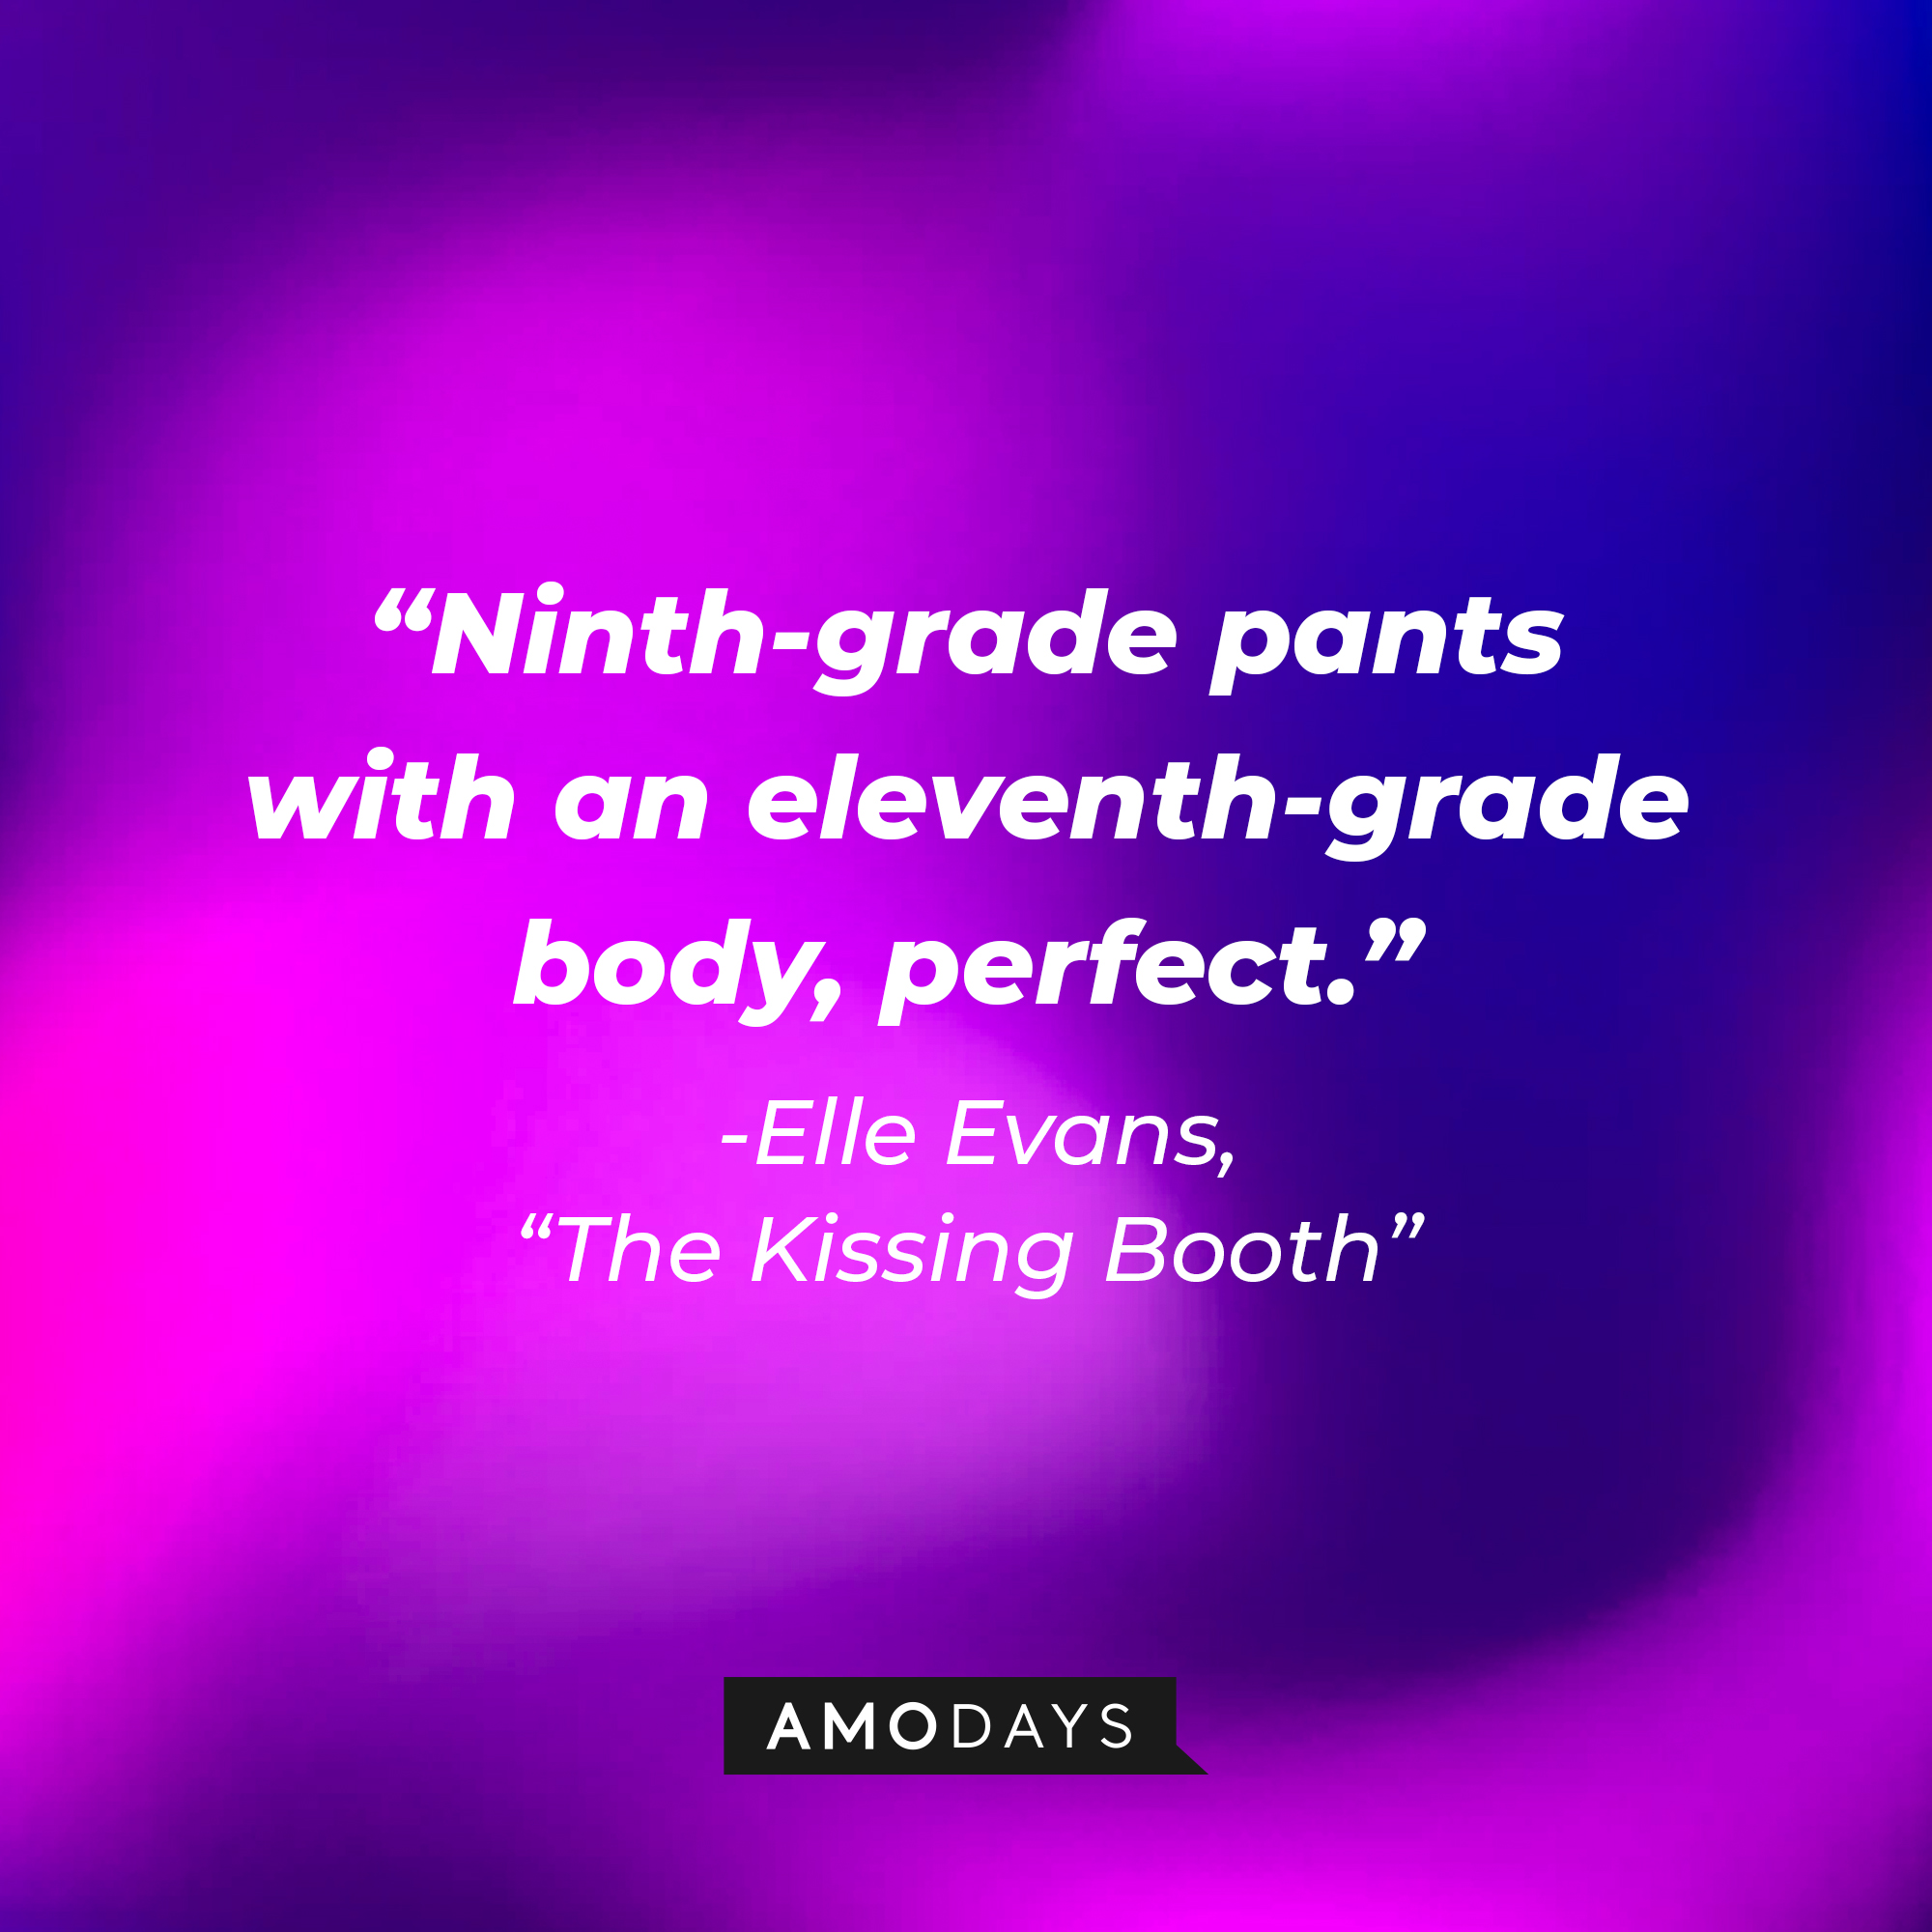 Elle Evans’ quote: "Ninth-grade pants with an eleventh-grade body, perfect." | Image: AmoDays